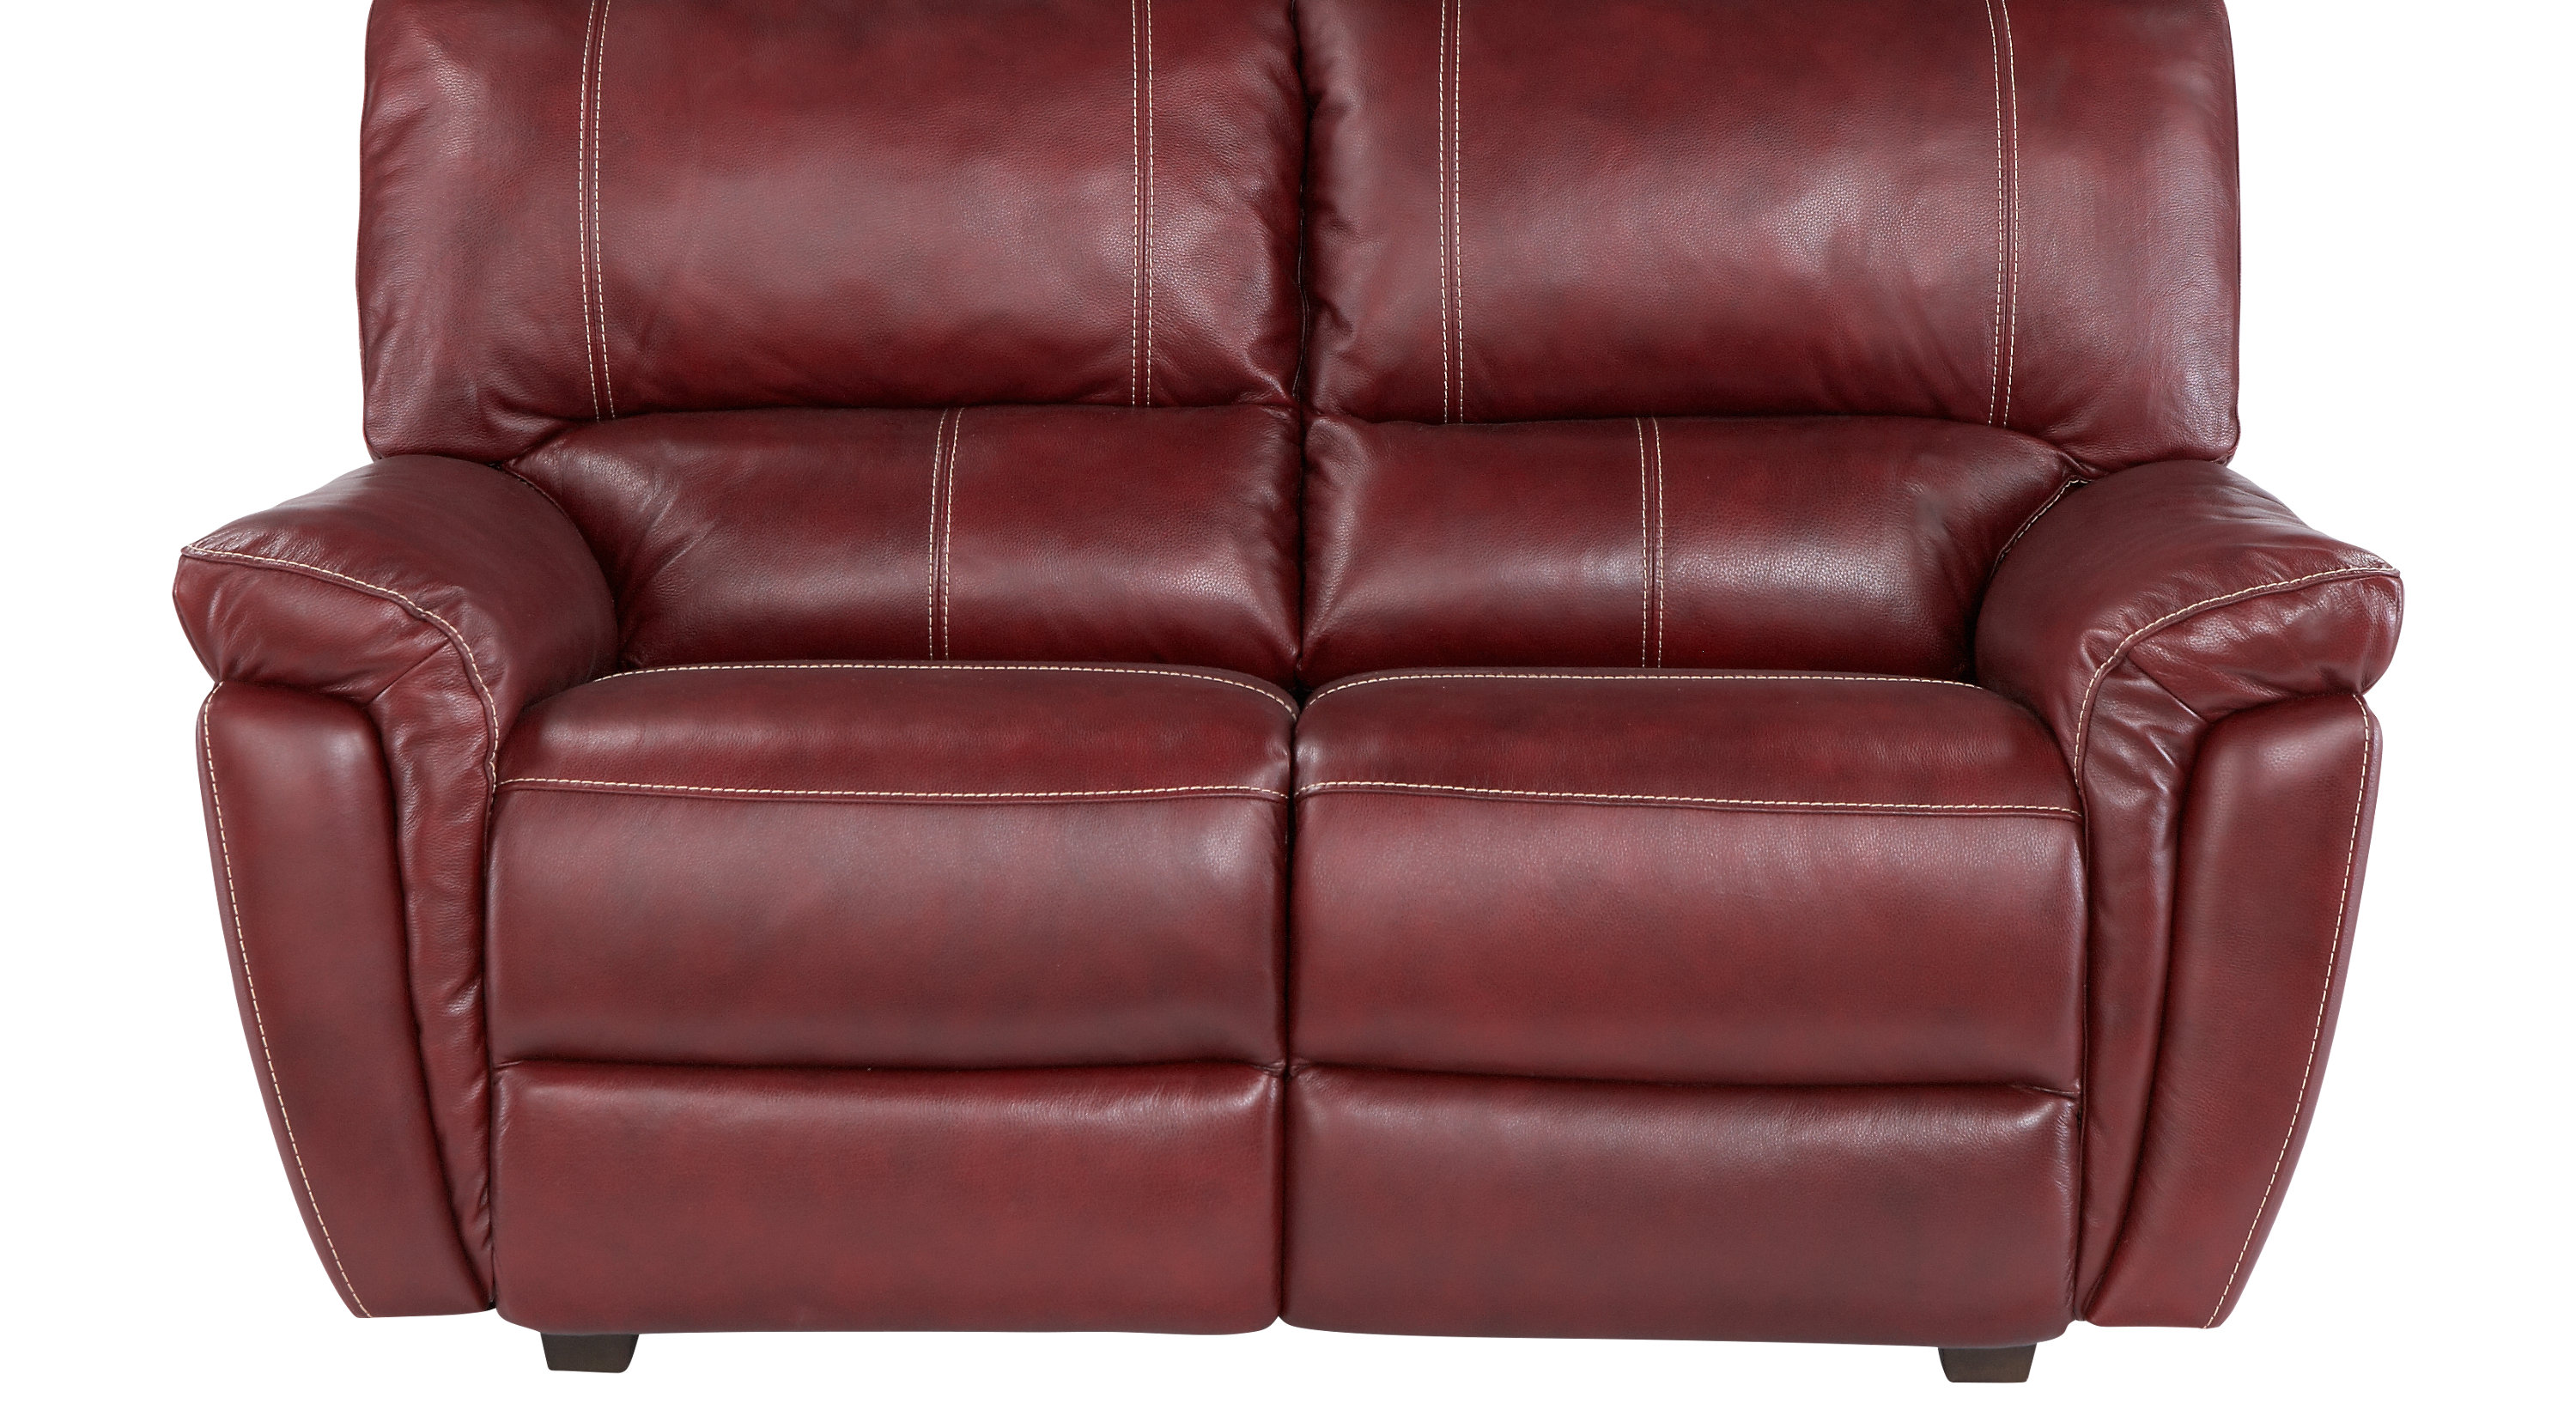 $577.00 - Browning Bluff Red Leather Loveseat - Classic - Contemporary,